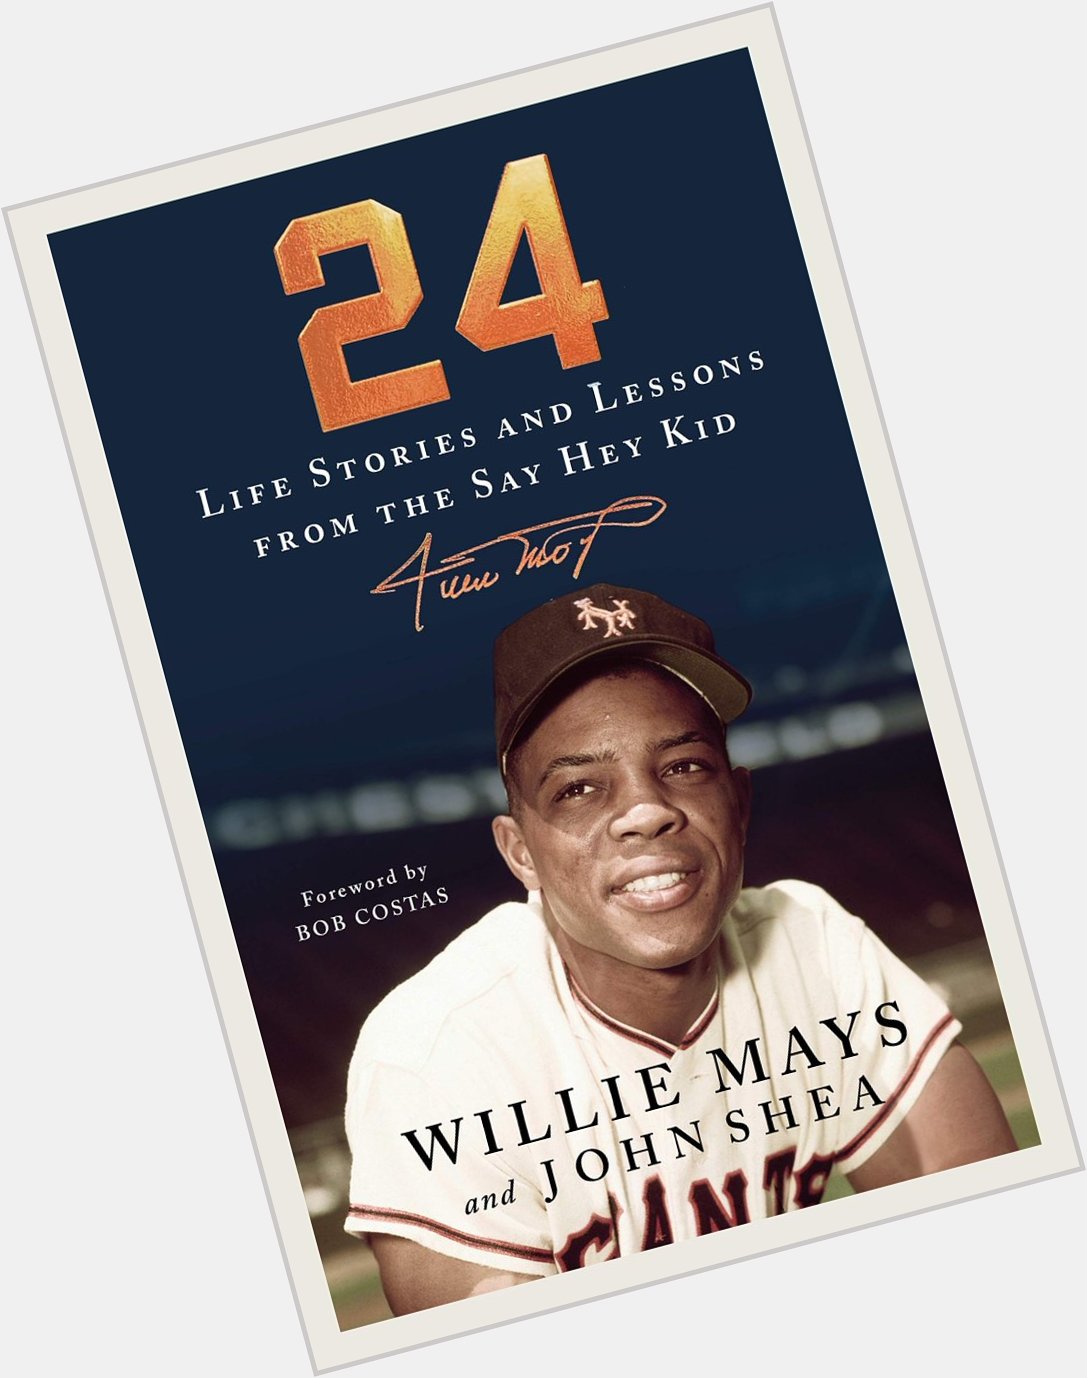 Happy book birthday to 24: Life Stories and Lessons from the Say Hey Kid by Willie Mays and John Shea! 